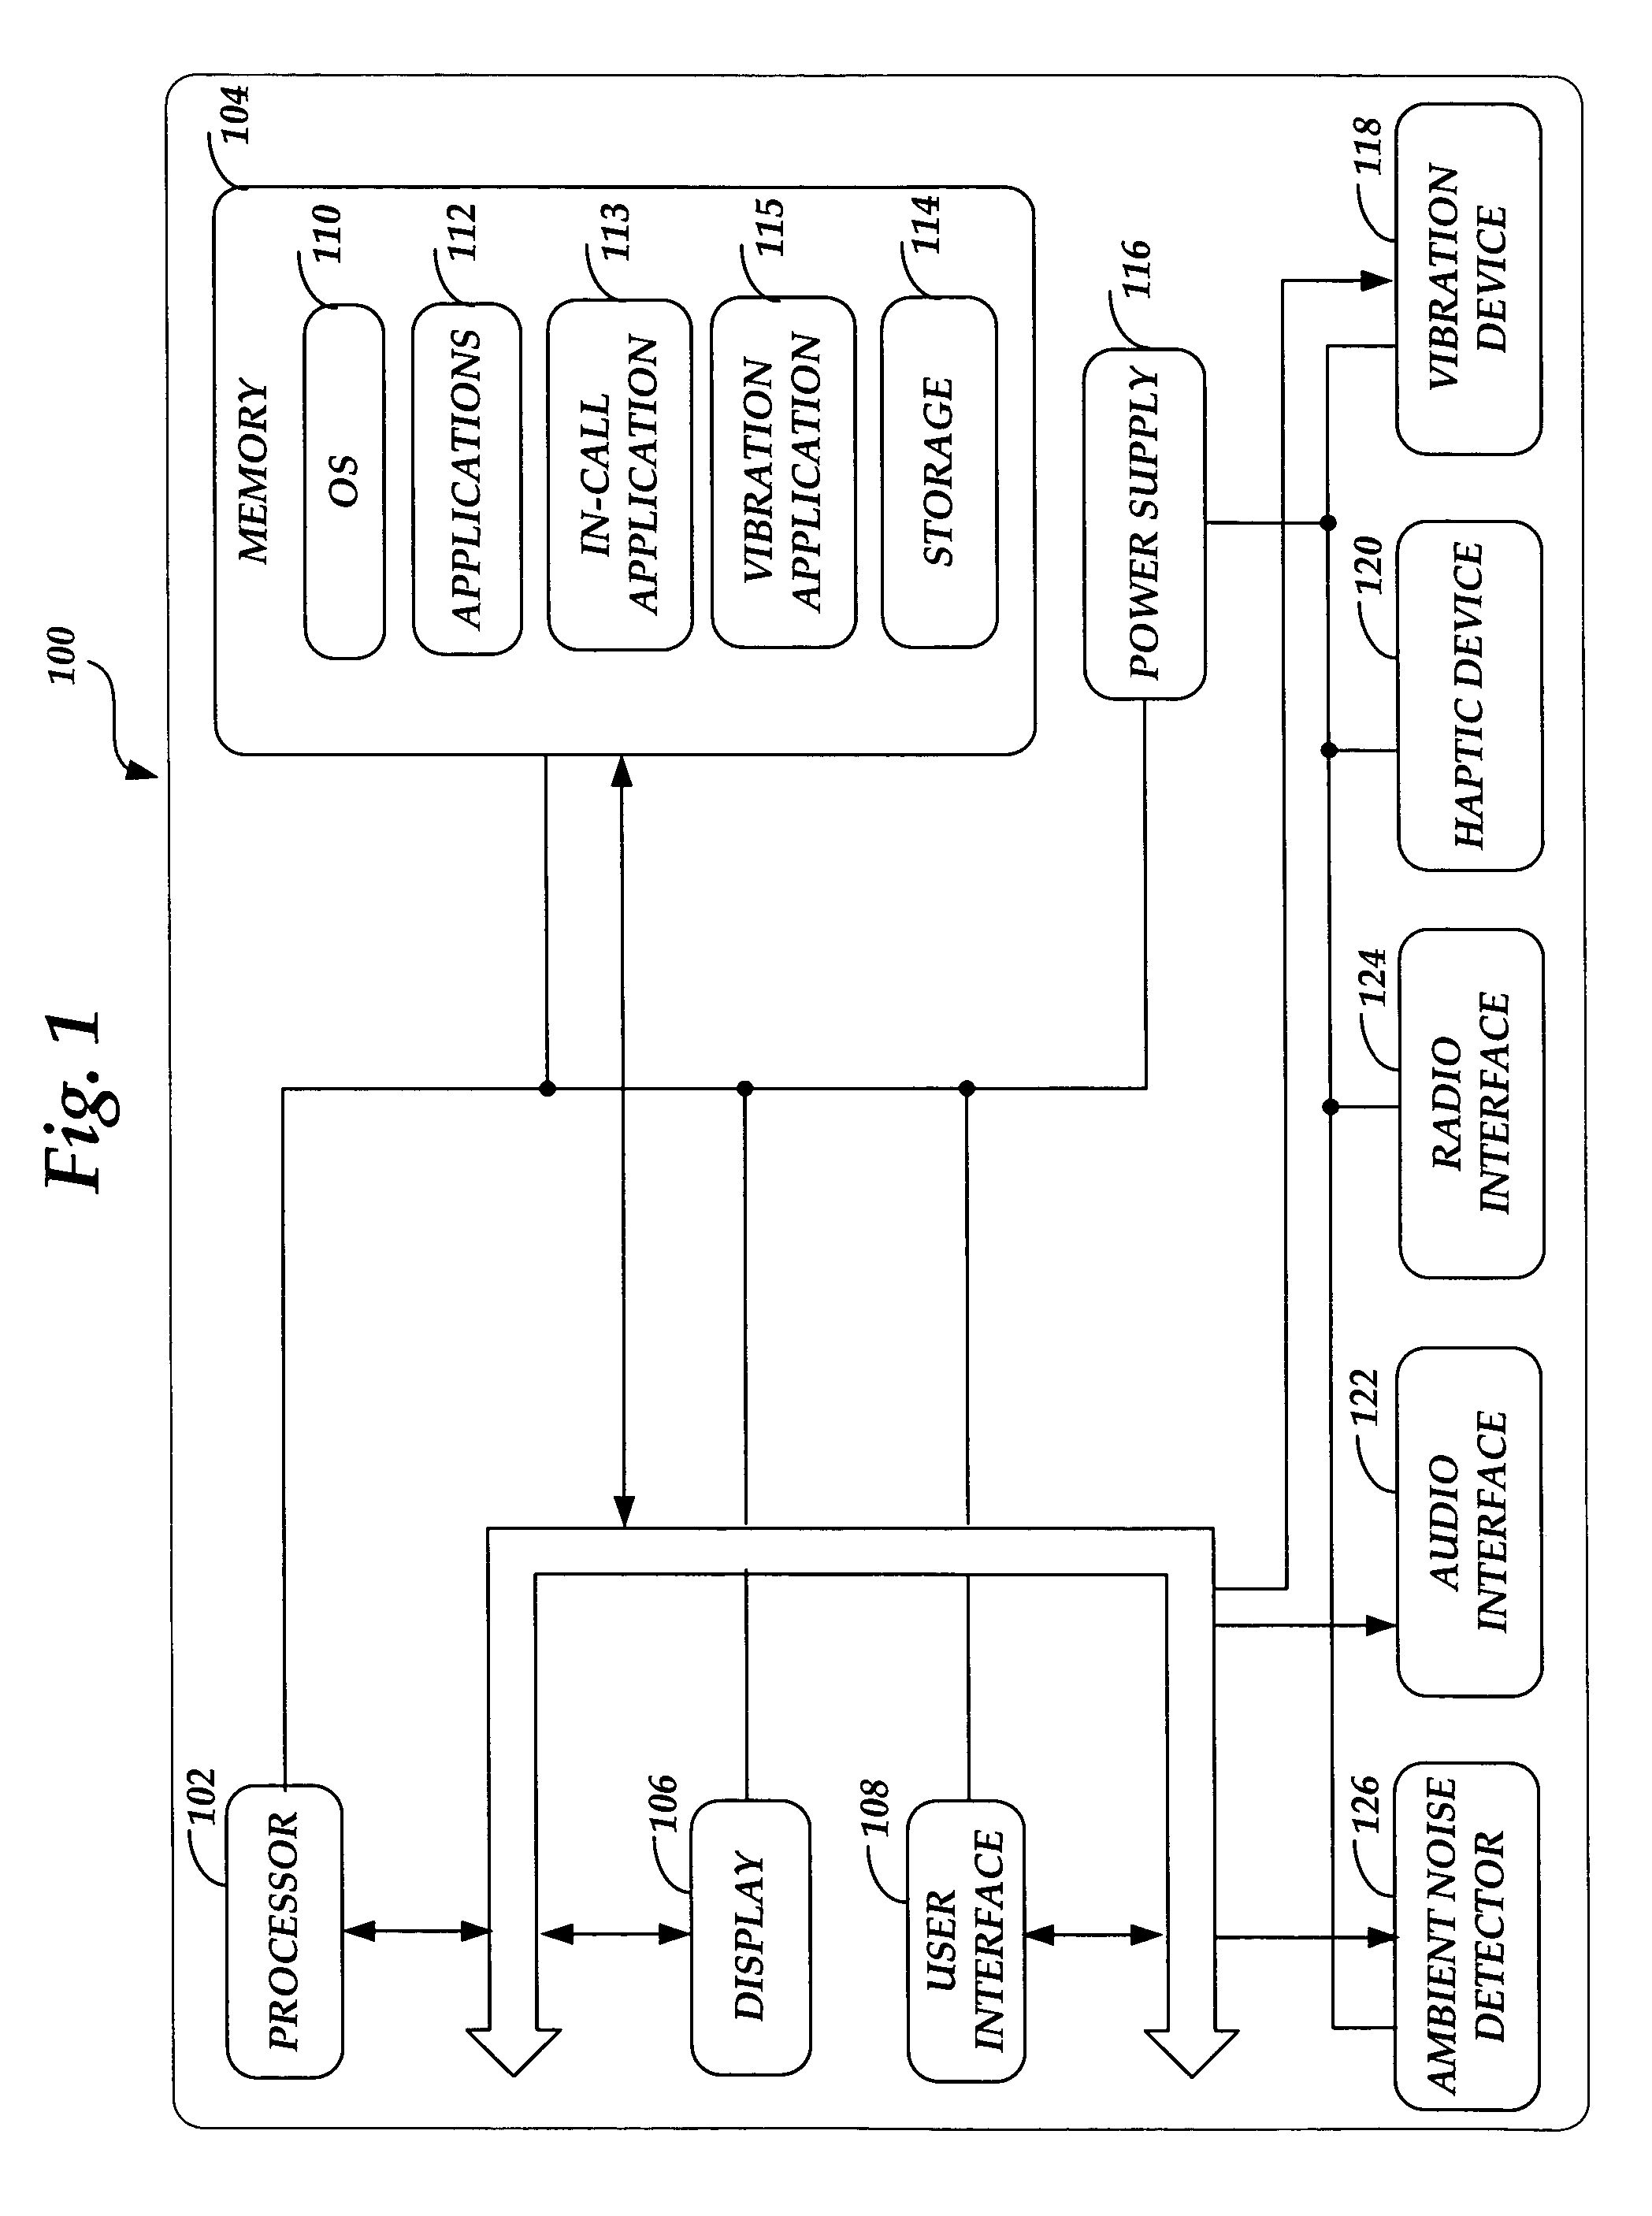 Programmable notifications for a mobile device